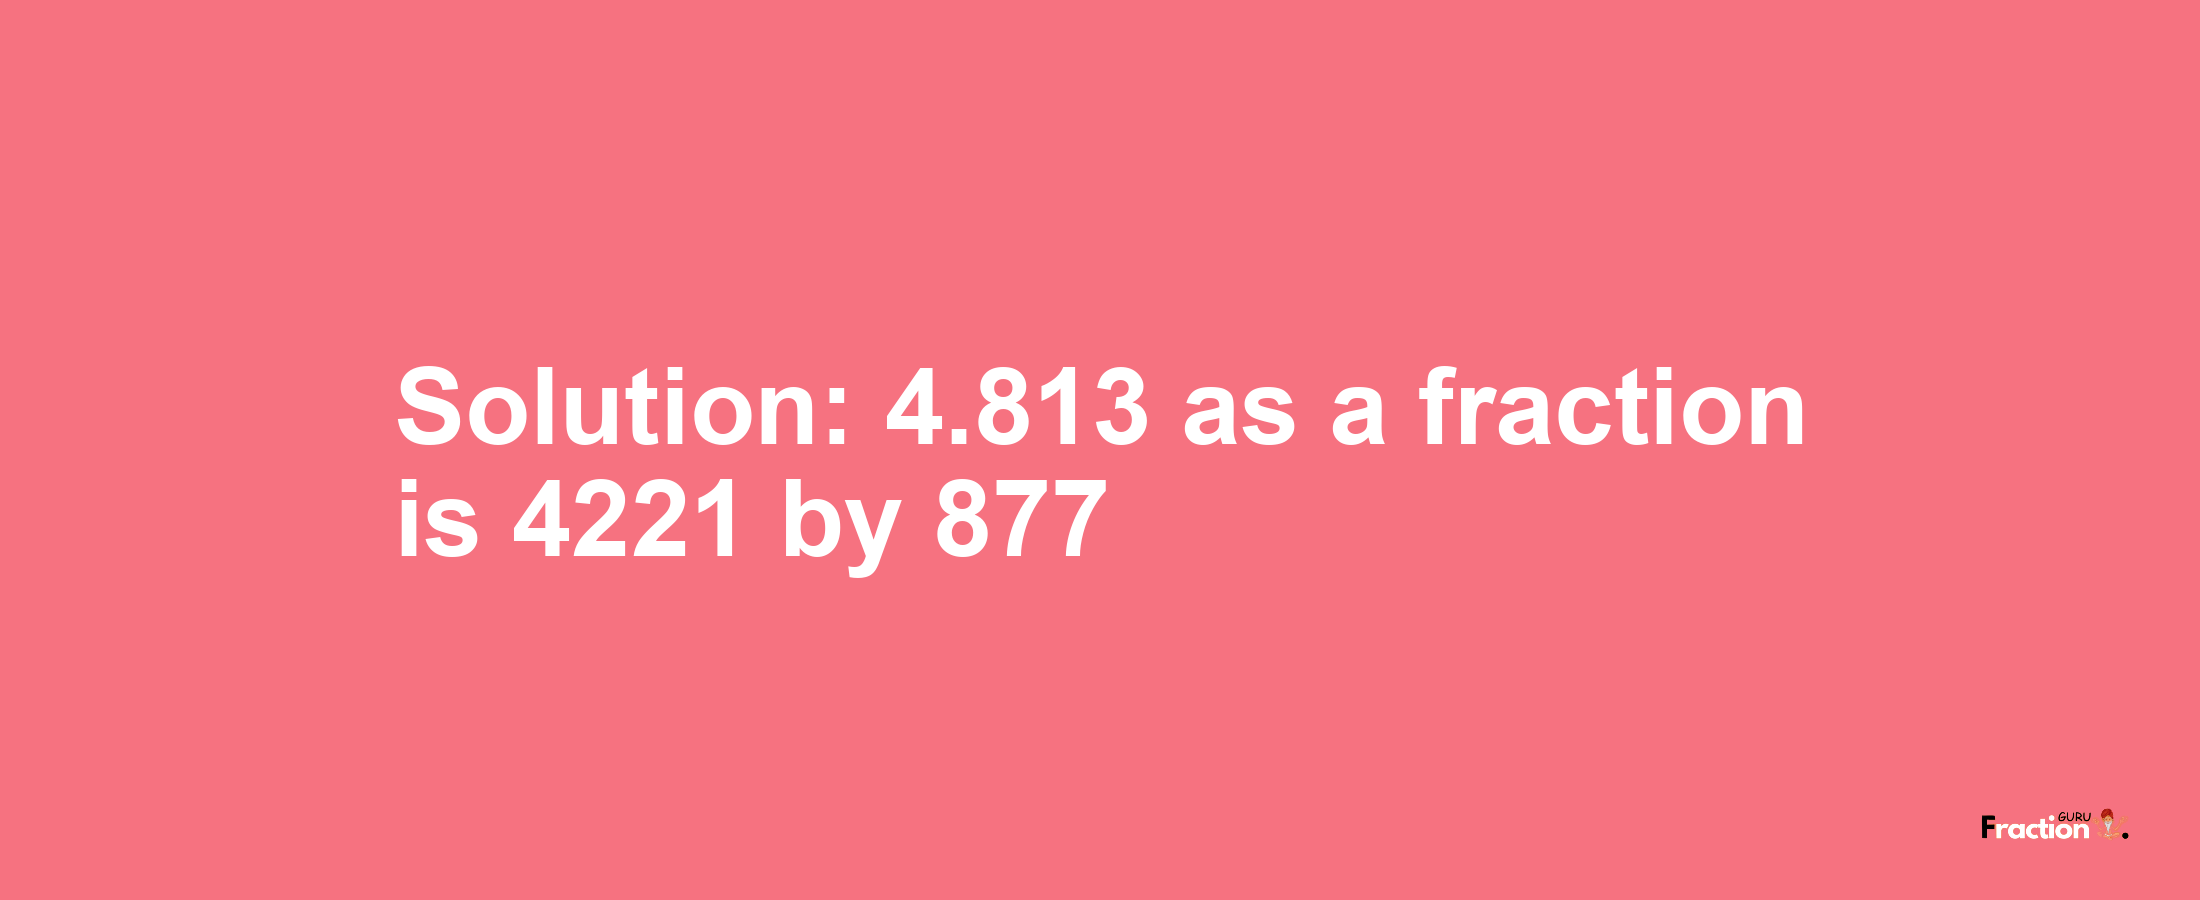 Solution:4.813 as a fraction is 4221/877